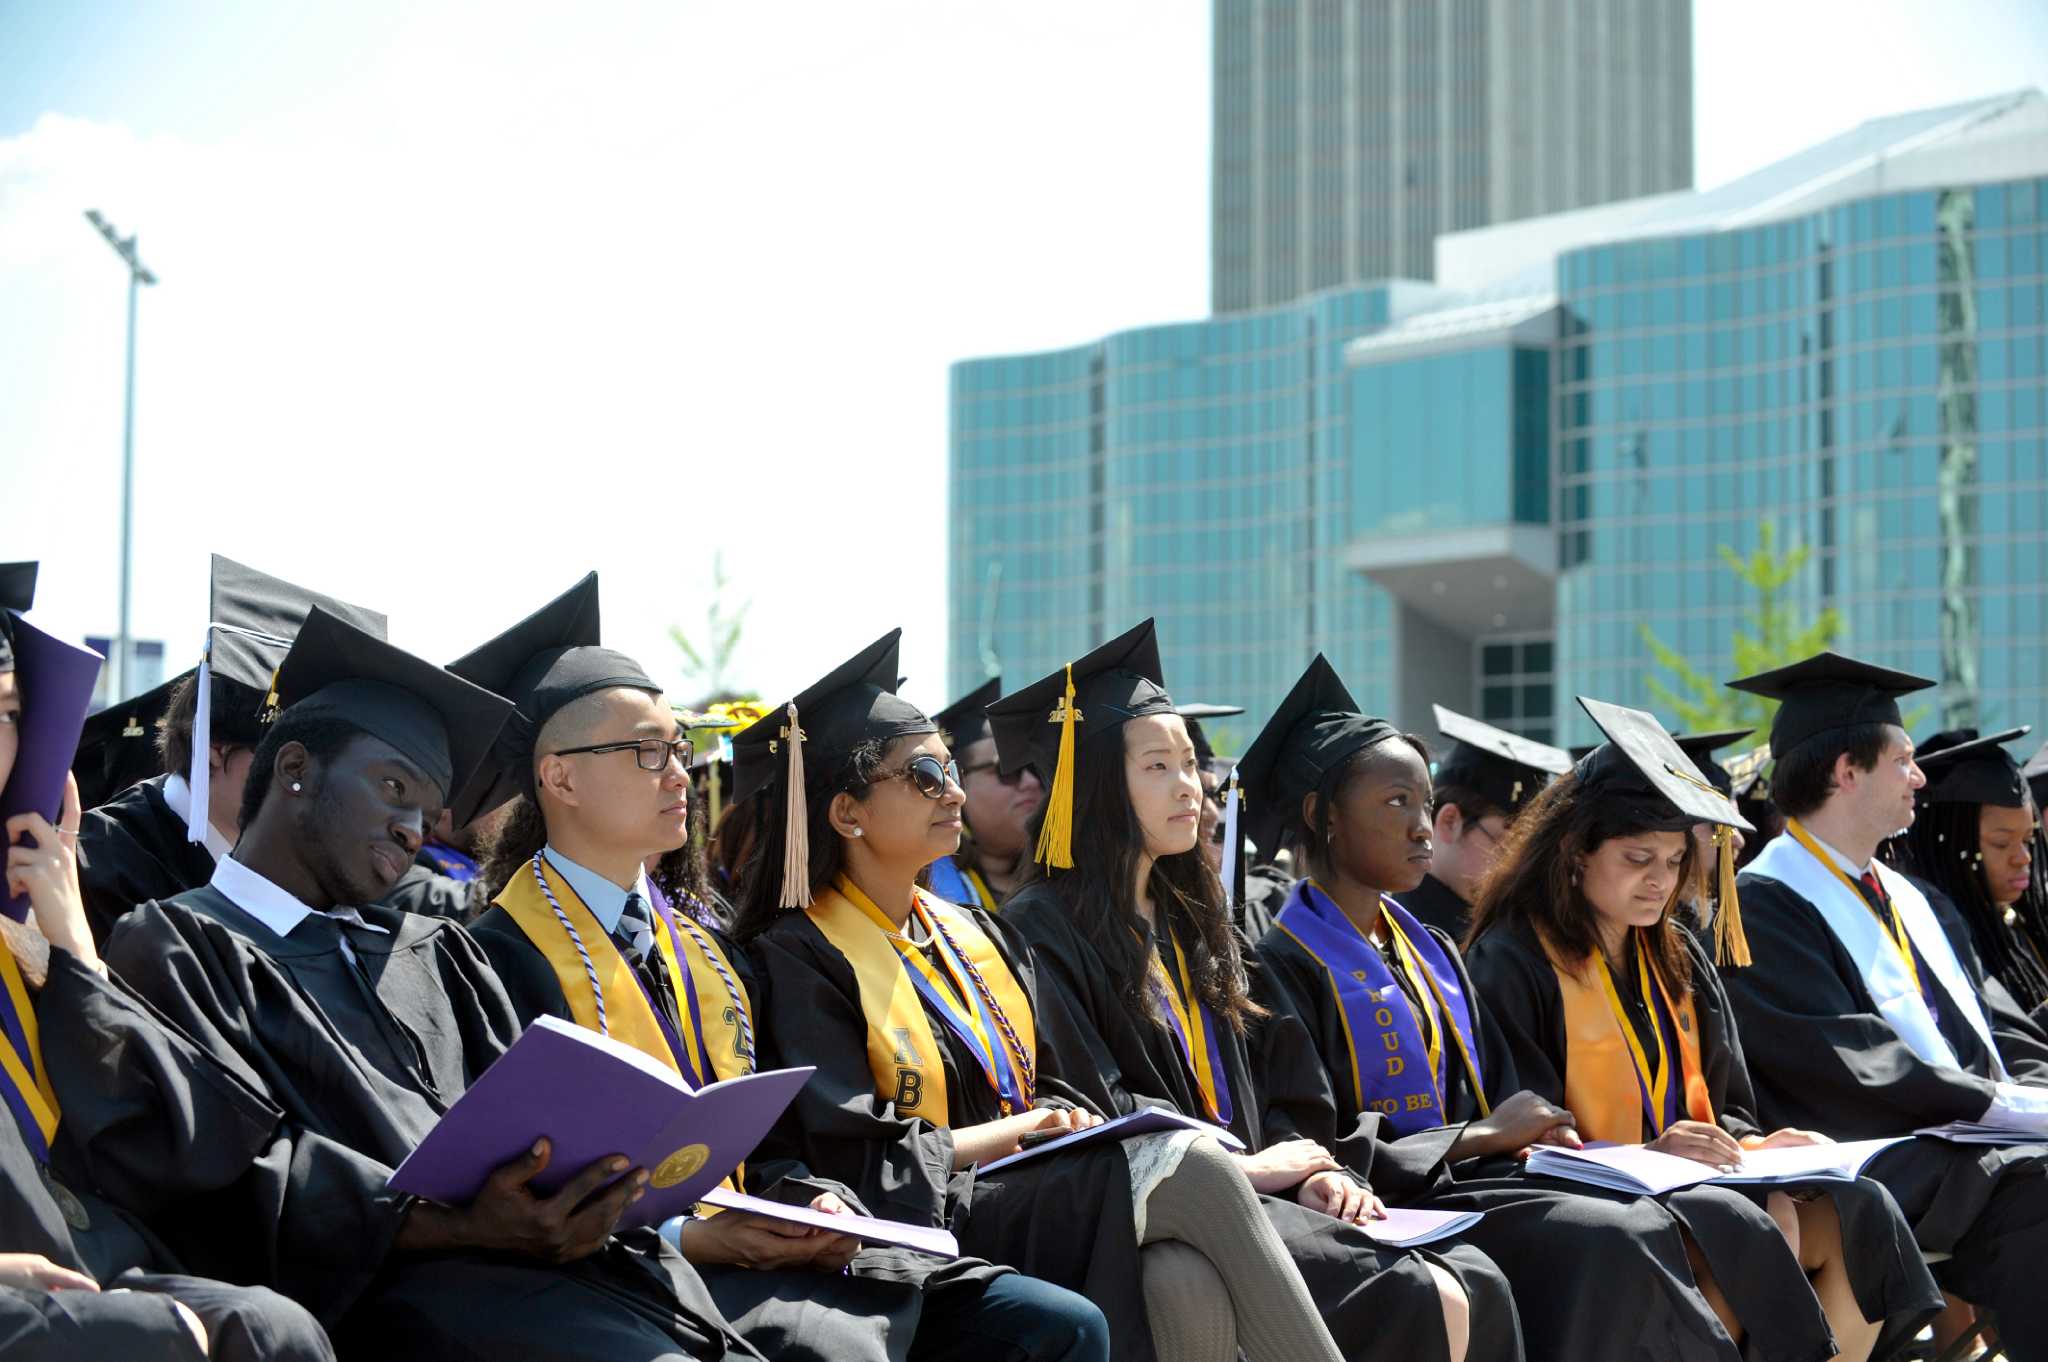 Flying colors at University at Albany commencement